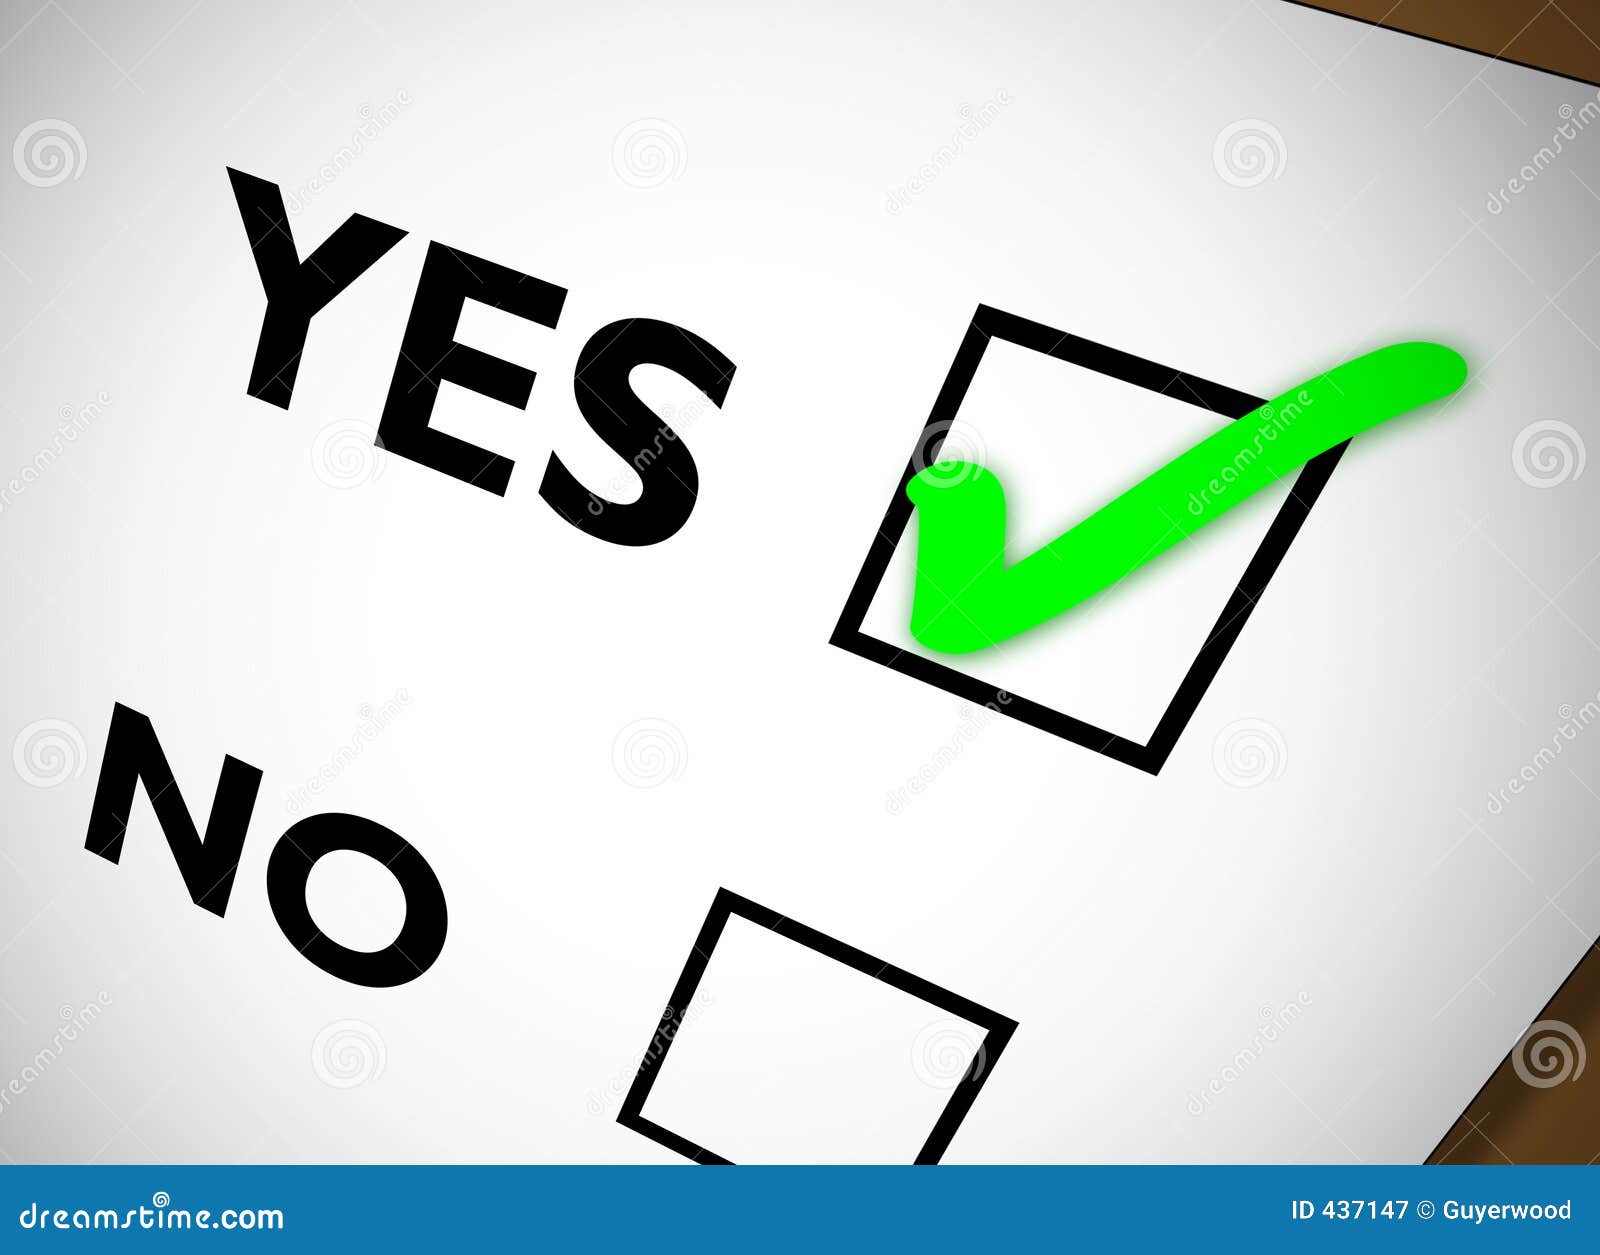 yes or no clipart - photo #29